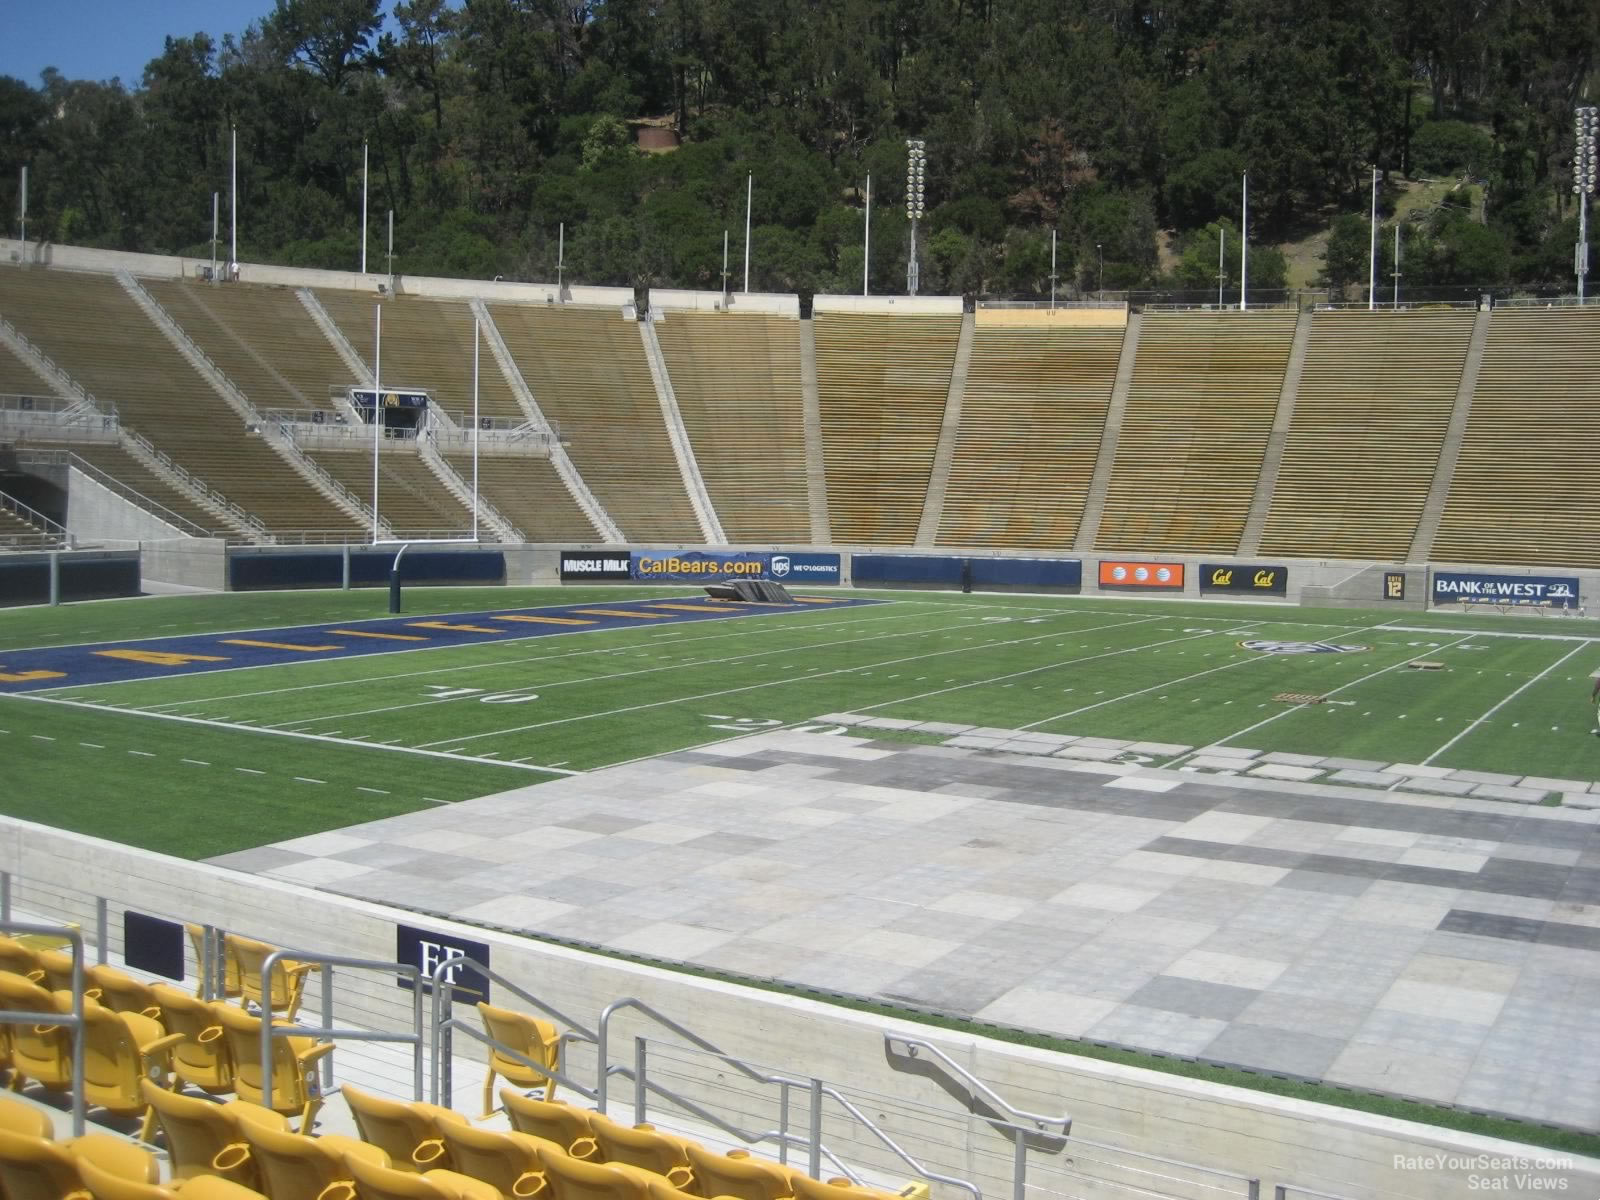 section g, row 9 seat view  - memorial stadium (cal)